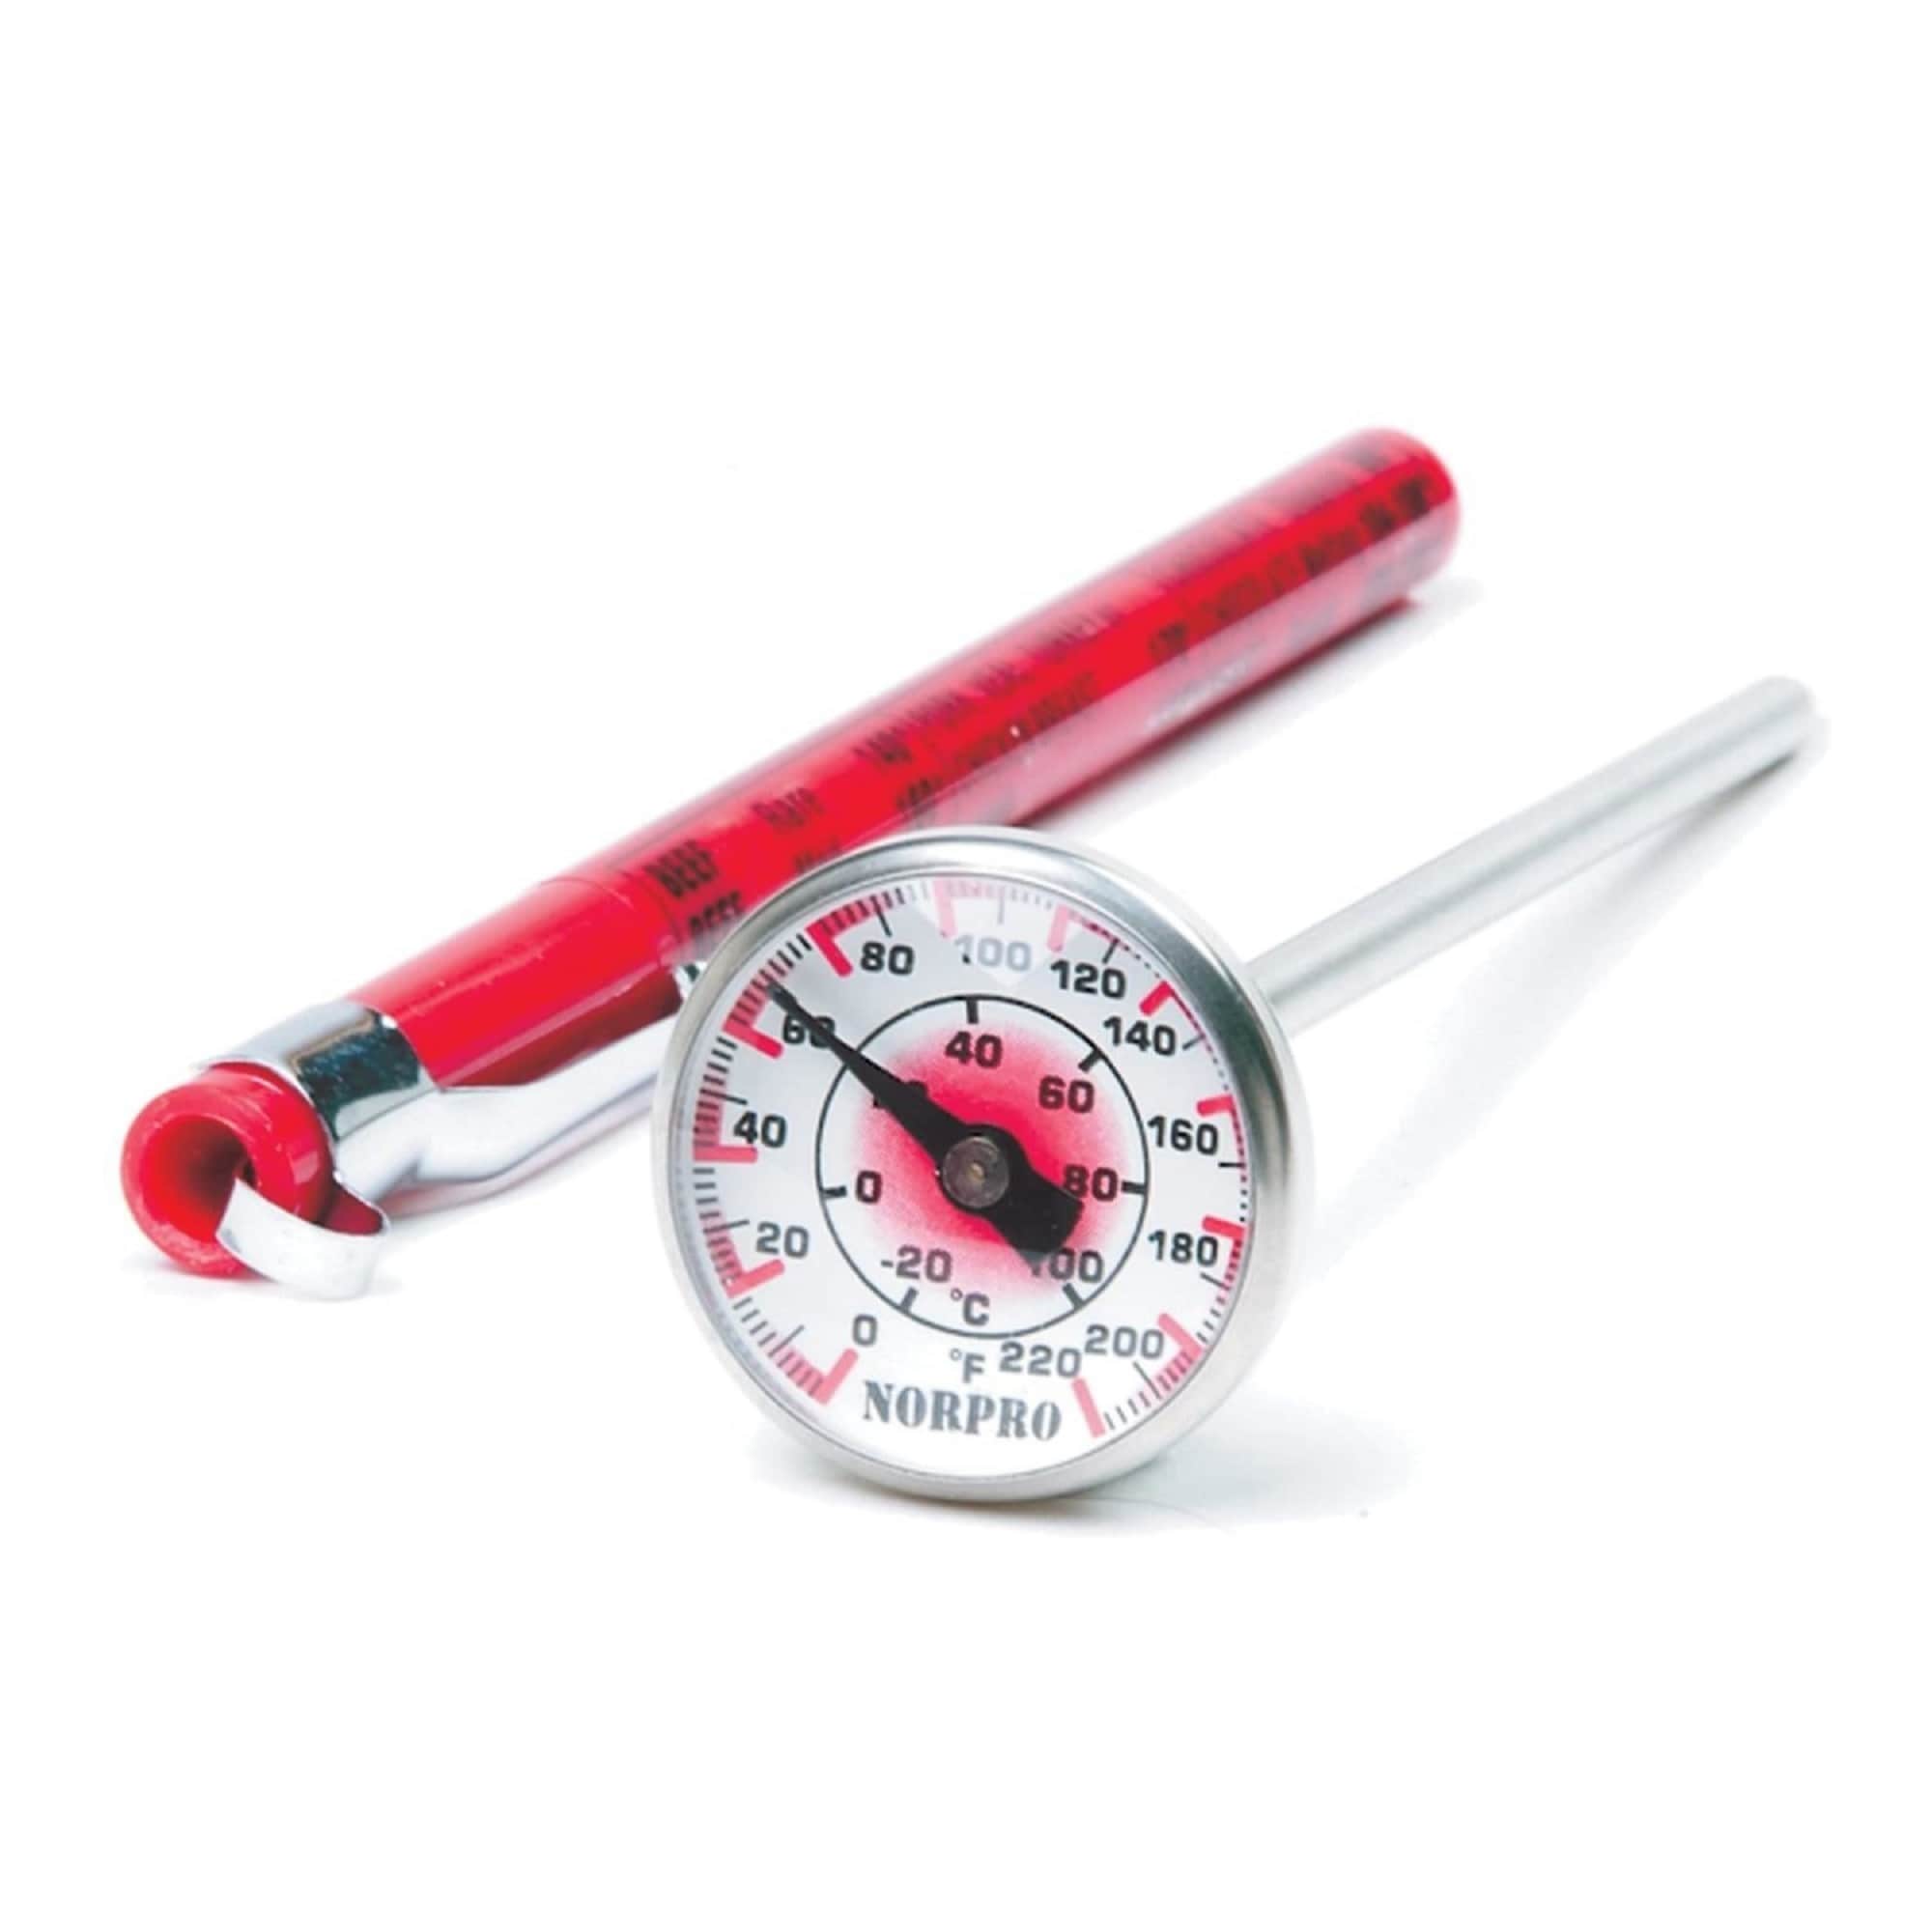 https://ak1.ostkcdn.com/images/products/is/images/direct/1e04e5f3580c7193323ebe35c0dcdac744d38378/Norpro-Instant-Read-Thermometer---Red.jpg